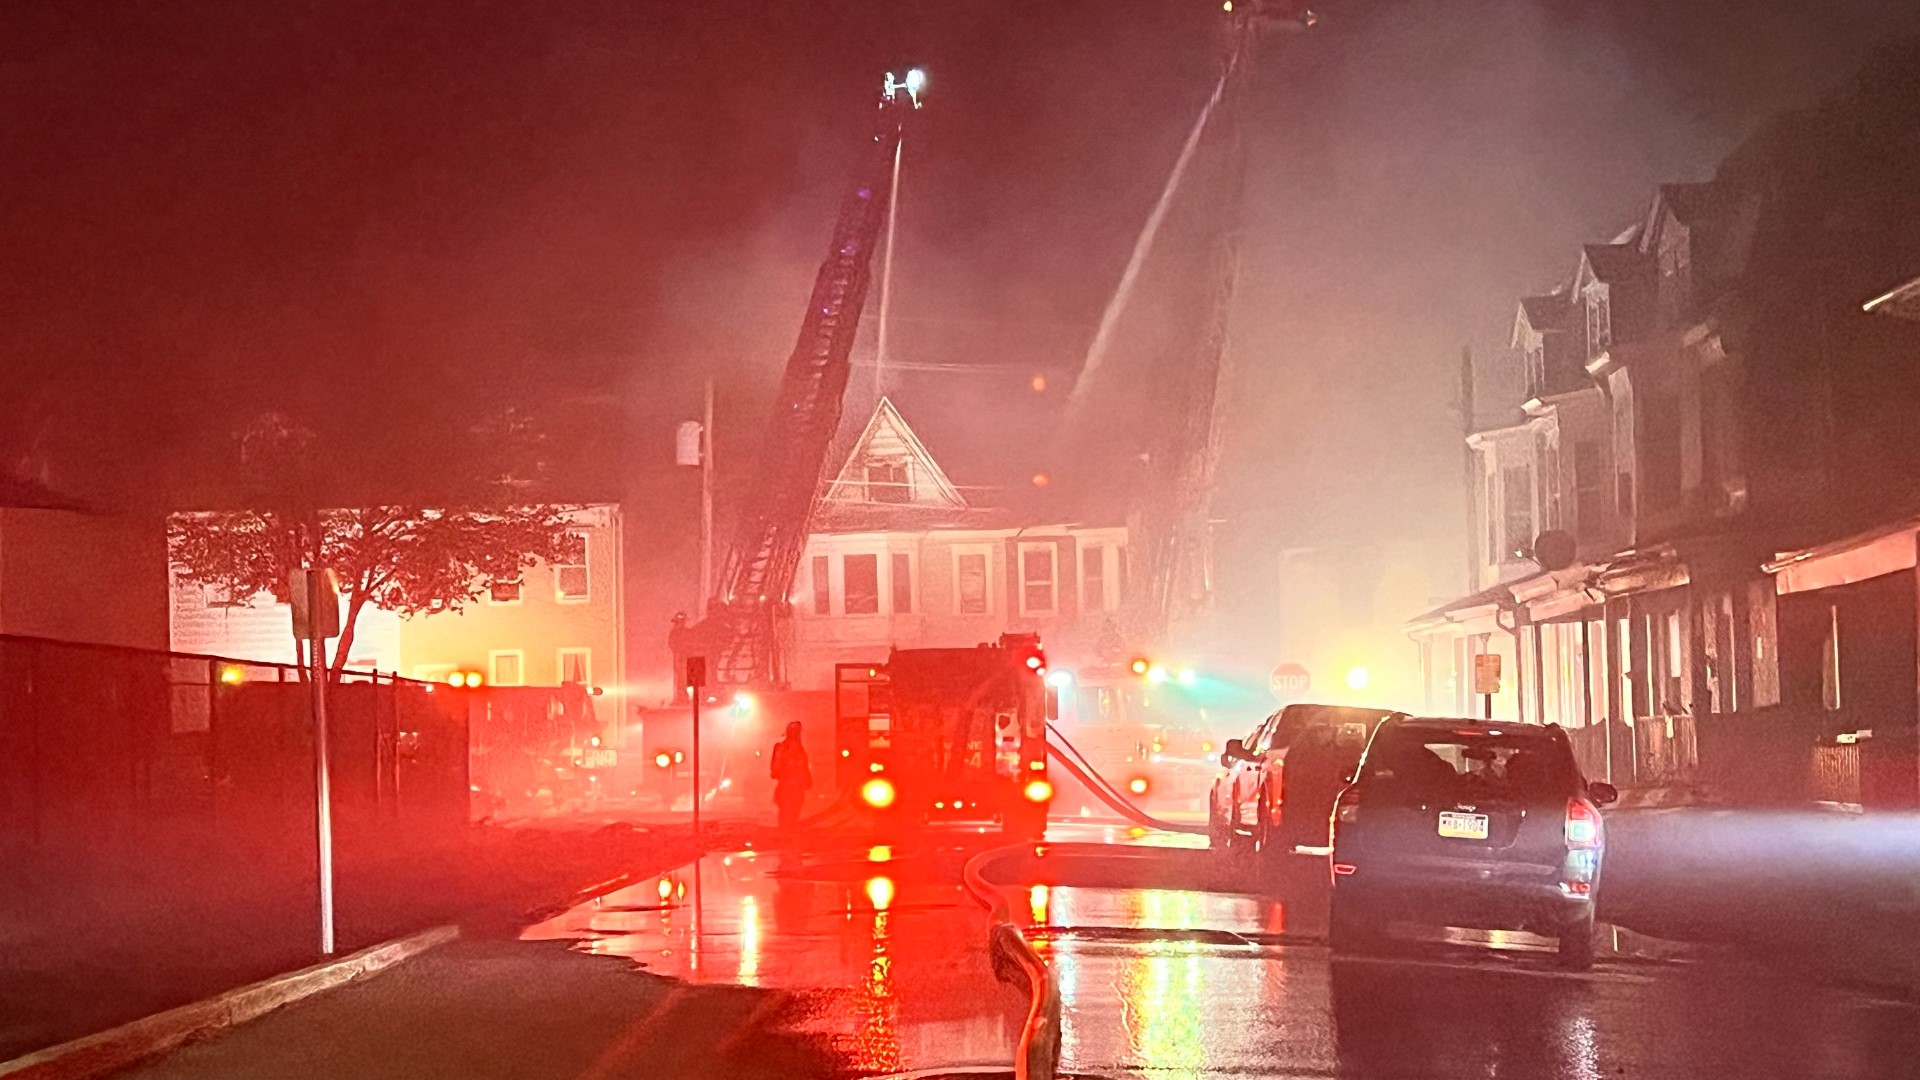 According to York County Dispatch, the fire began just before 7 p.m. on Sunday.